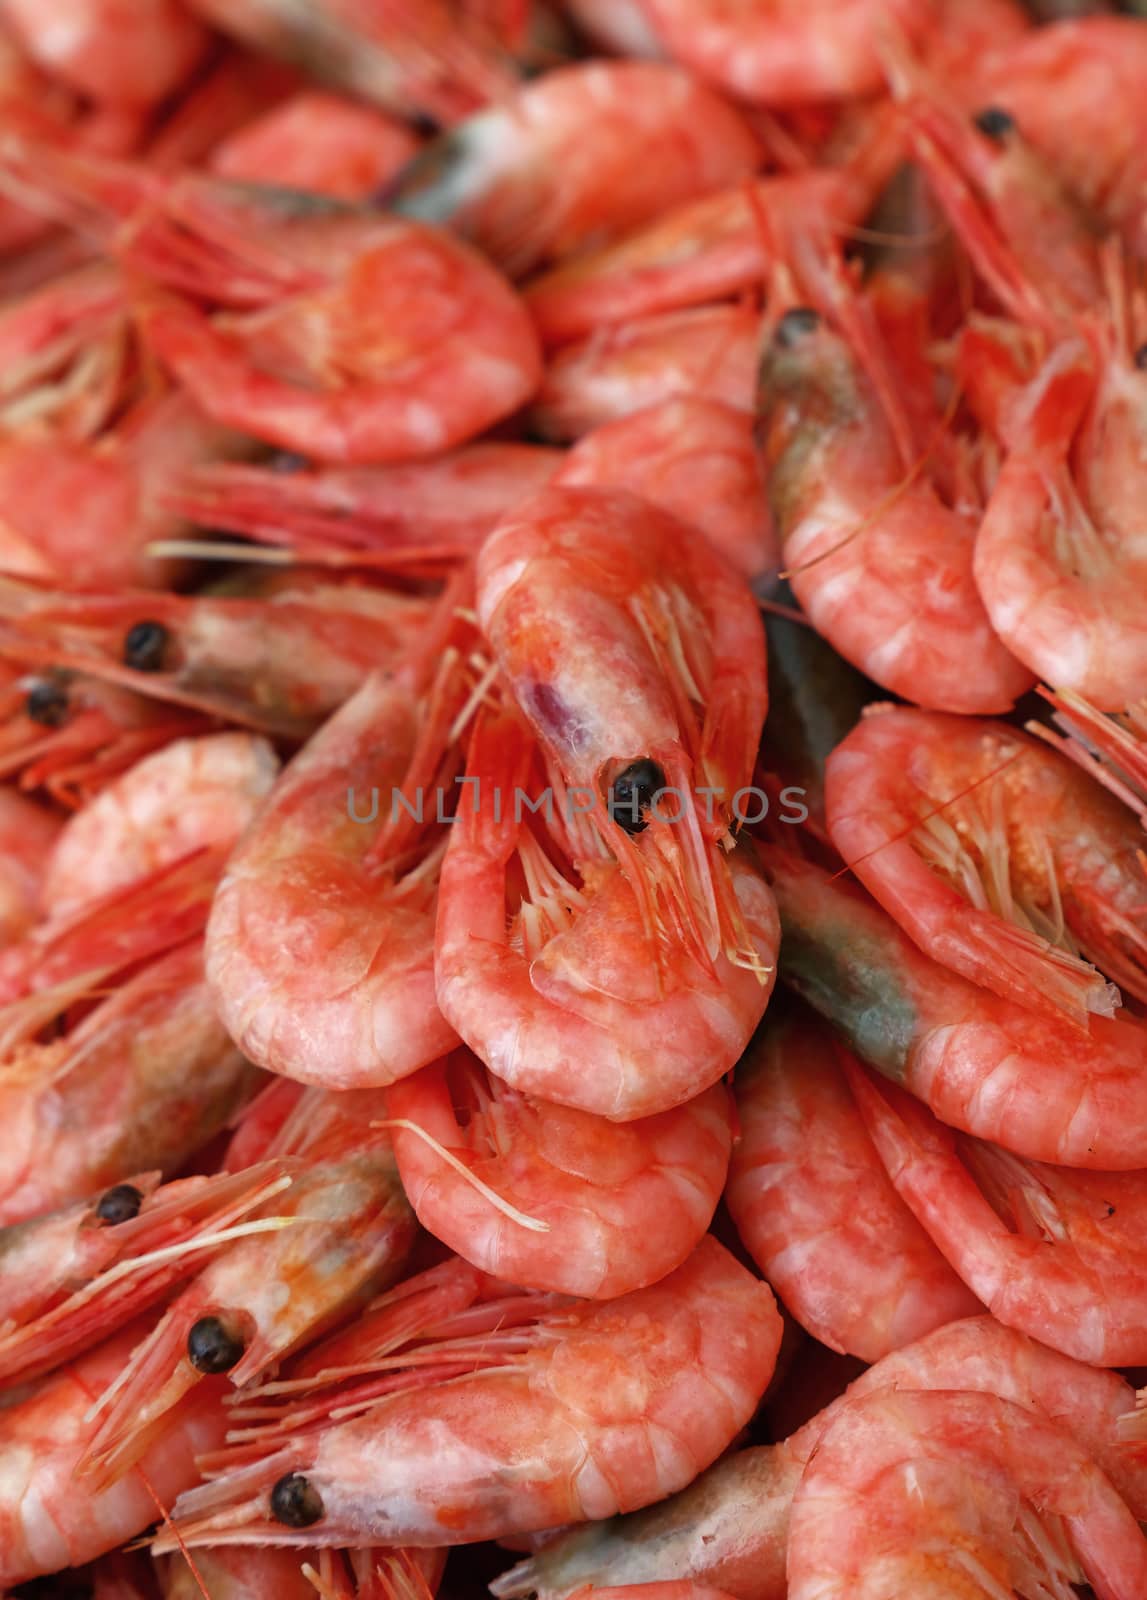 Heap of fresh boiled or steamed small pink shrimps on retail market display, close up, high angle view